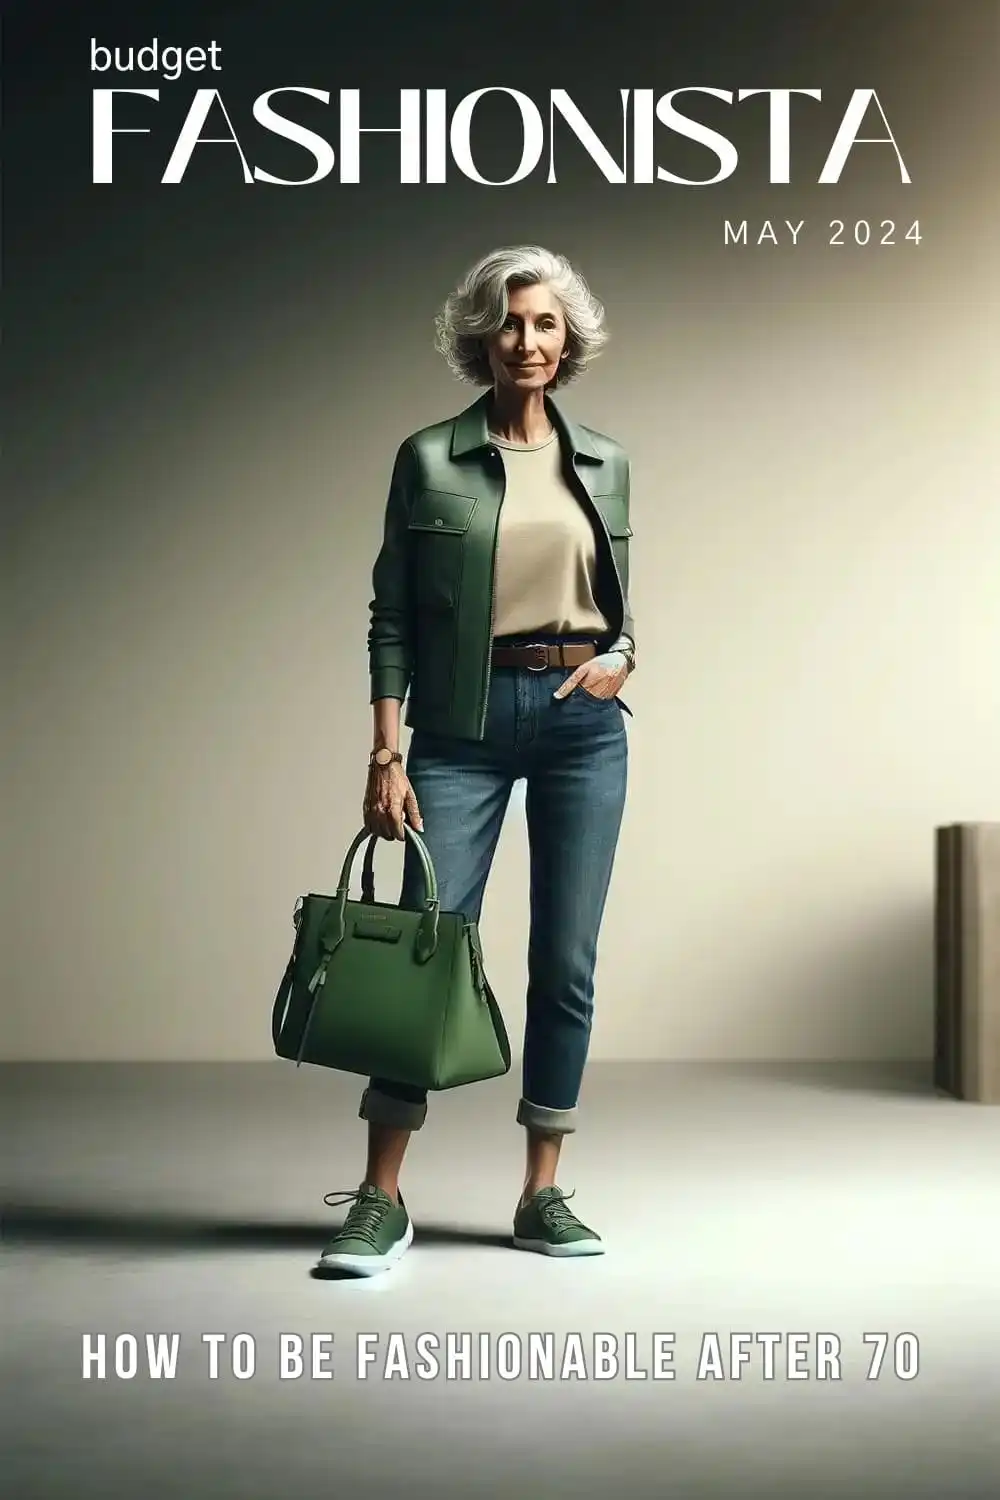 Older woman wearing stylish green jacket with jeans.